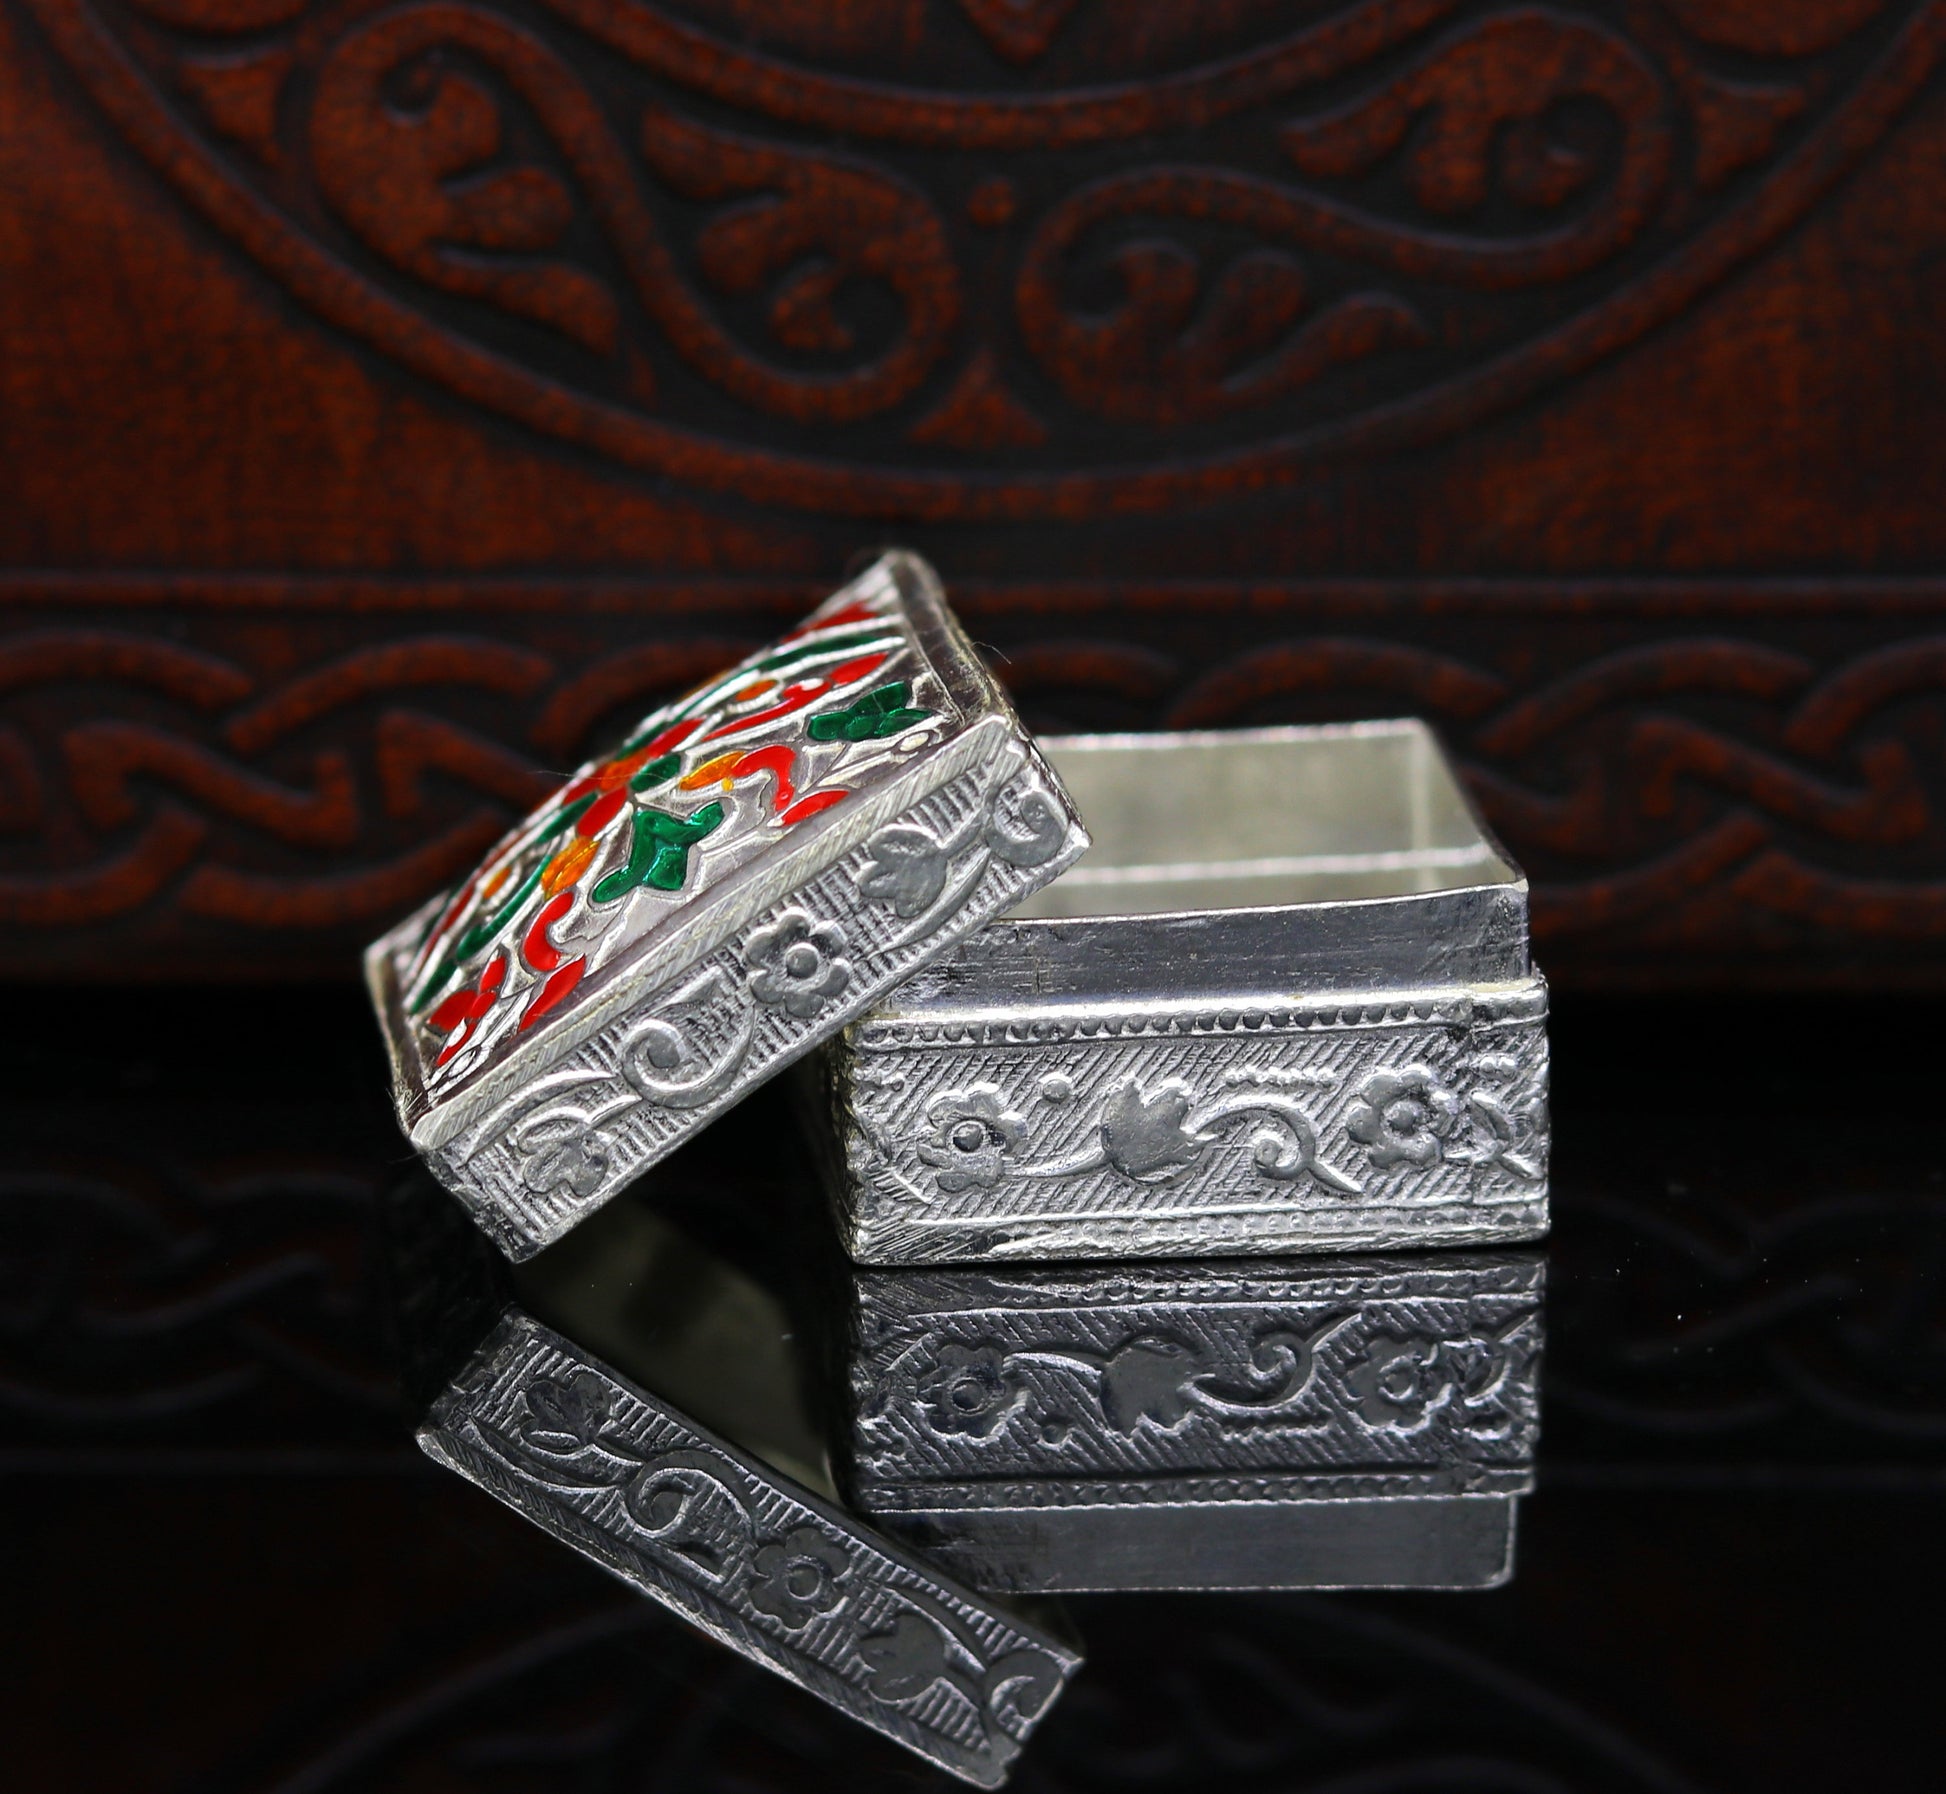 Enamel floral work square shape 925 solid silver utensils trinket box, casket box, container box, jewelry box, silver utensils, vessel stb50 - TRIBAL ORNAMENTS